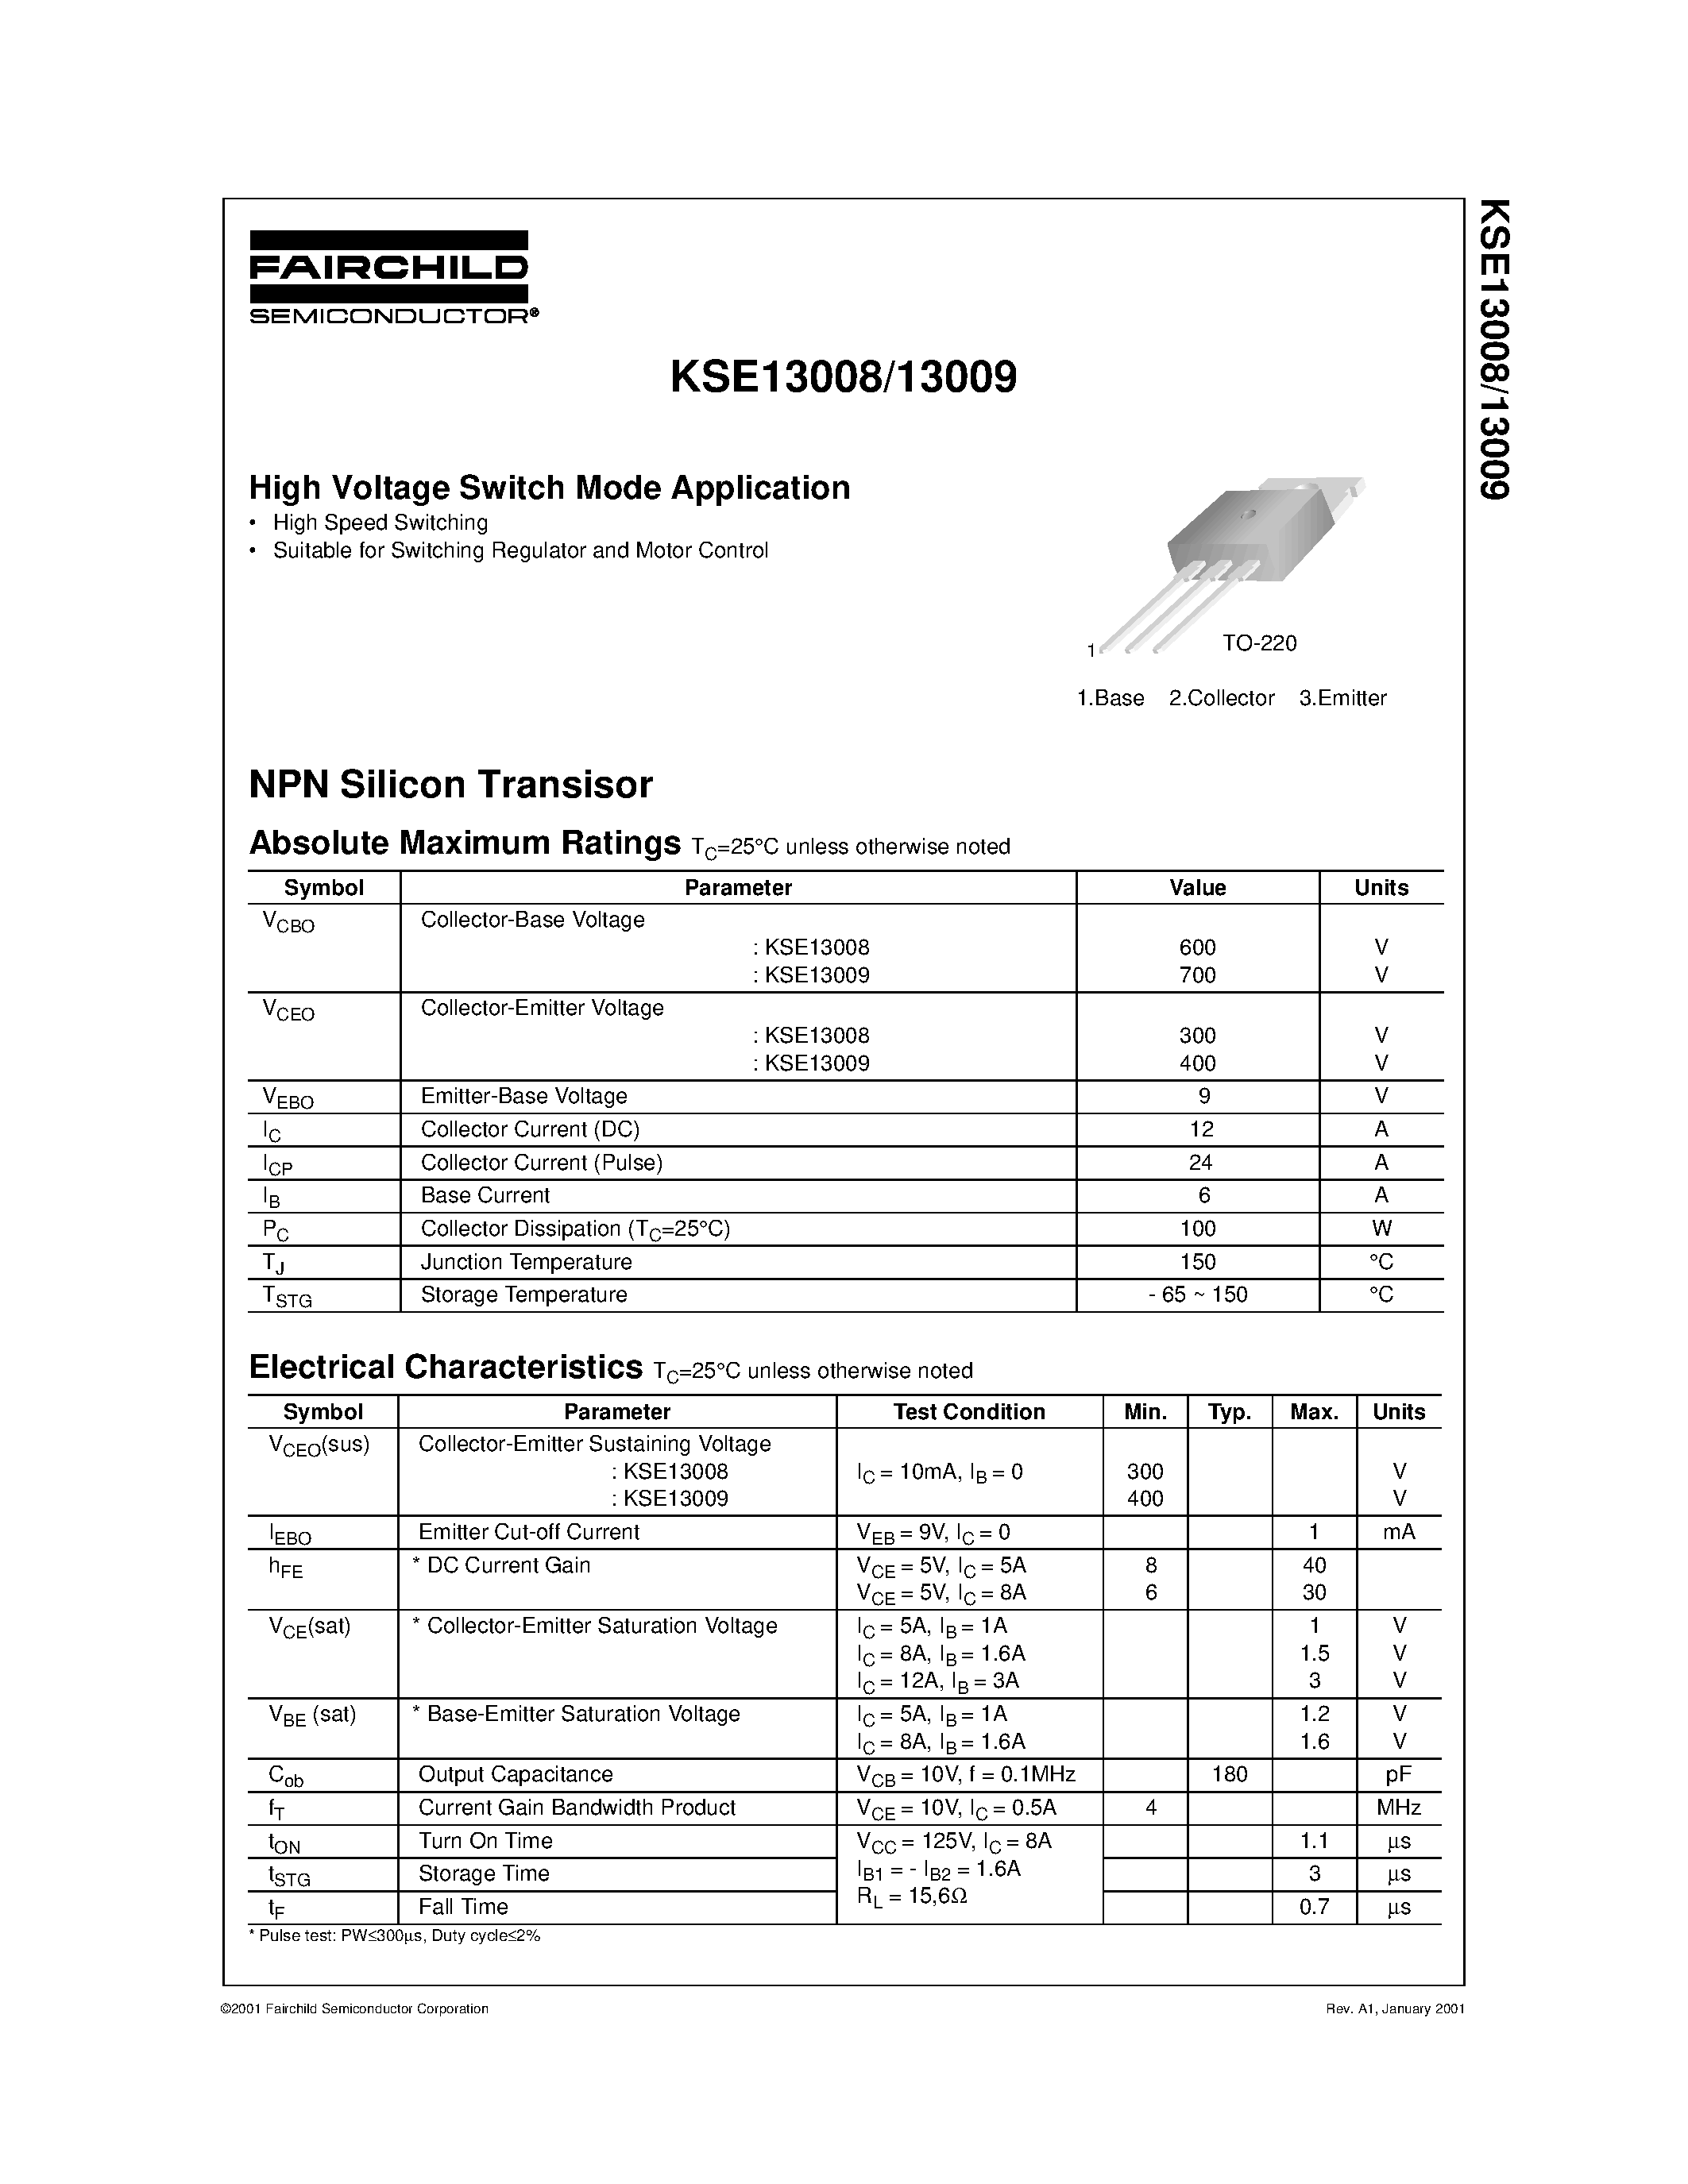 Datasheet KSE13008 - High Voltage Switch Mode Application page 1